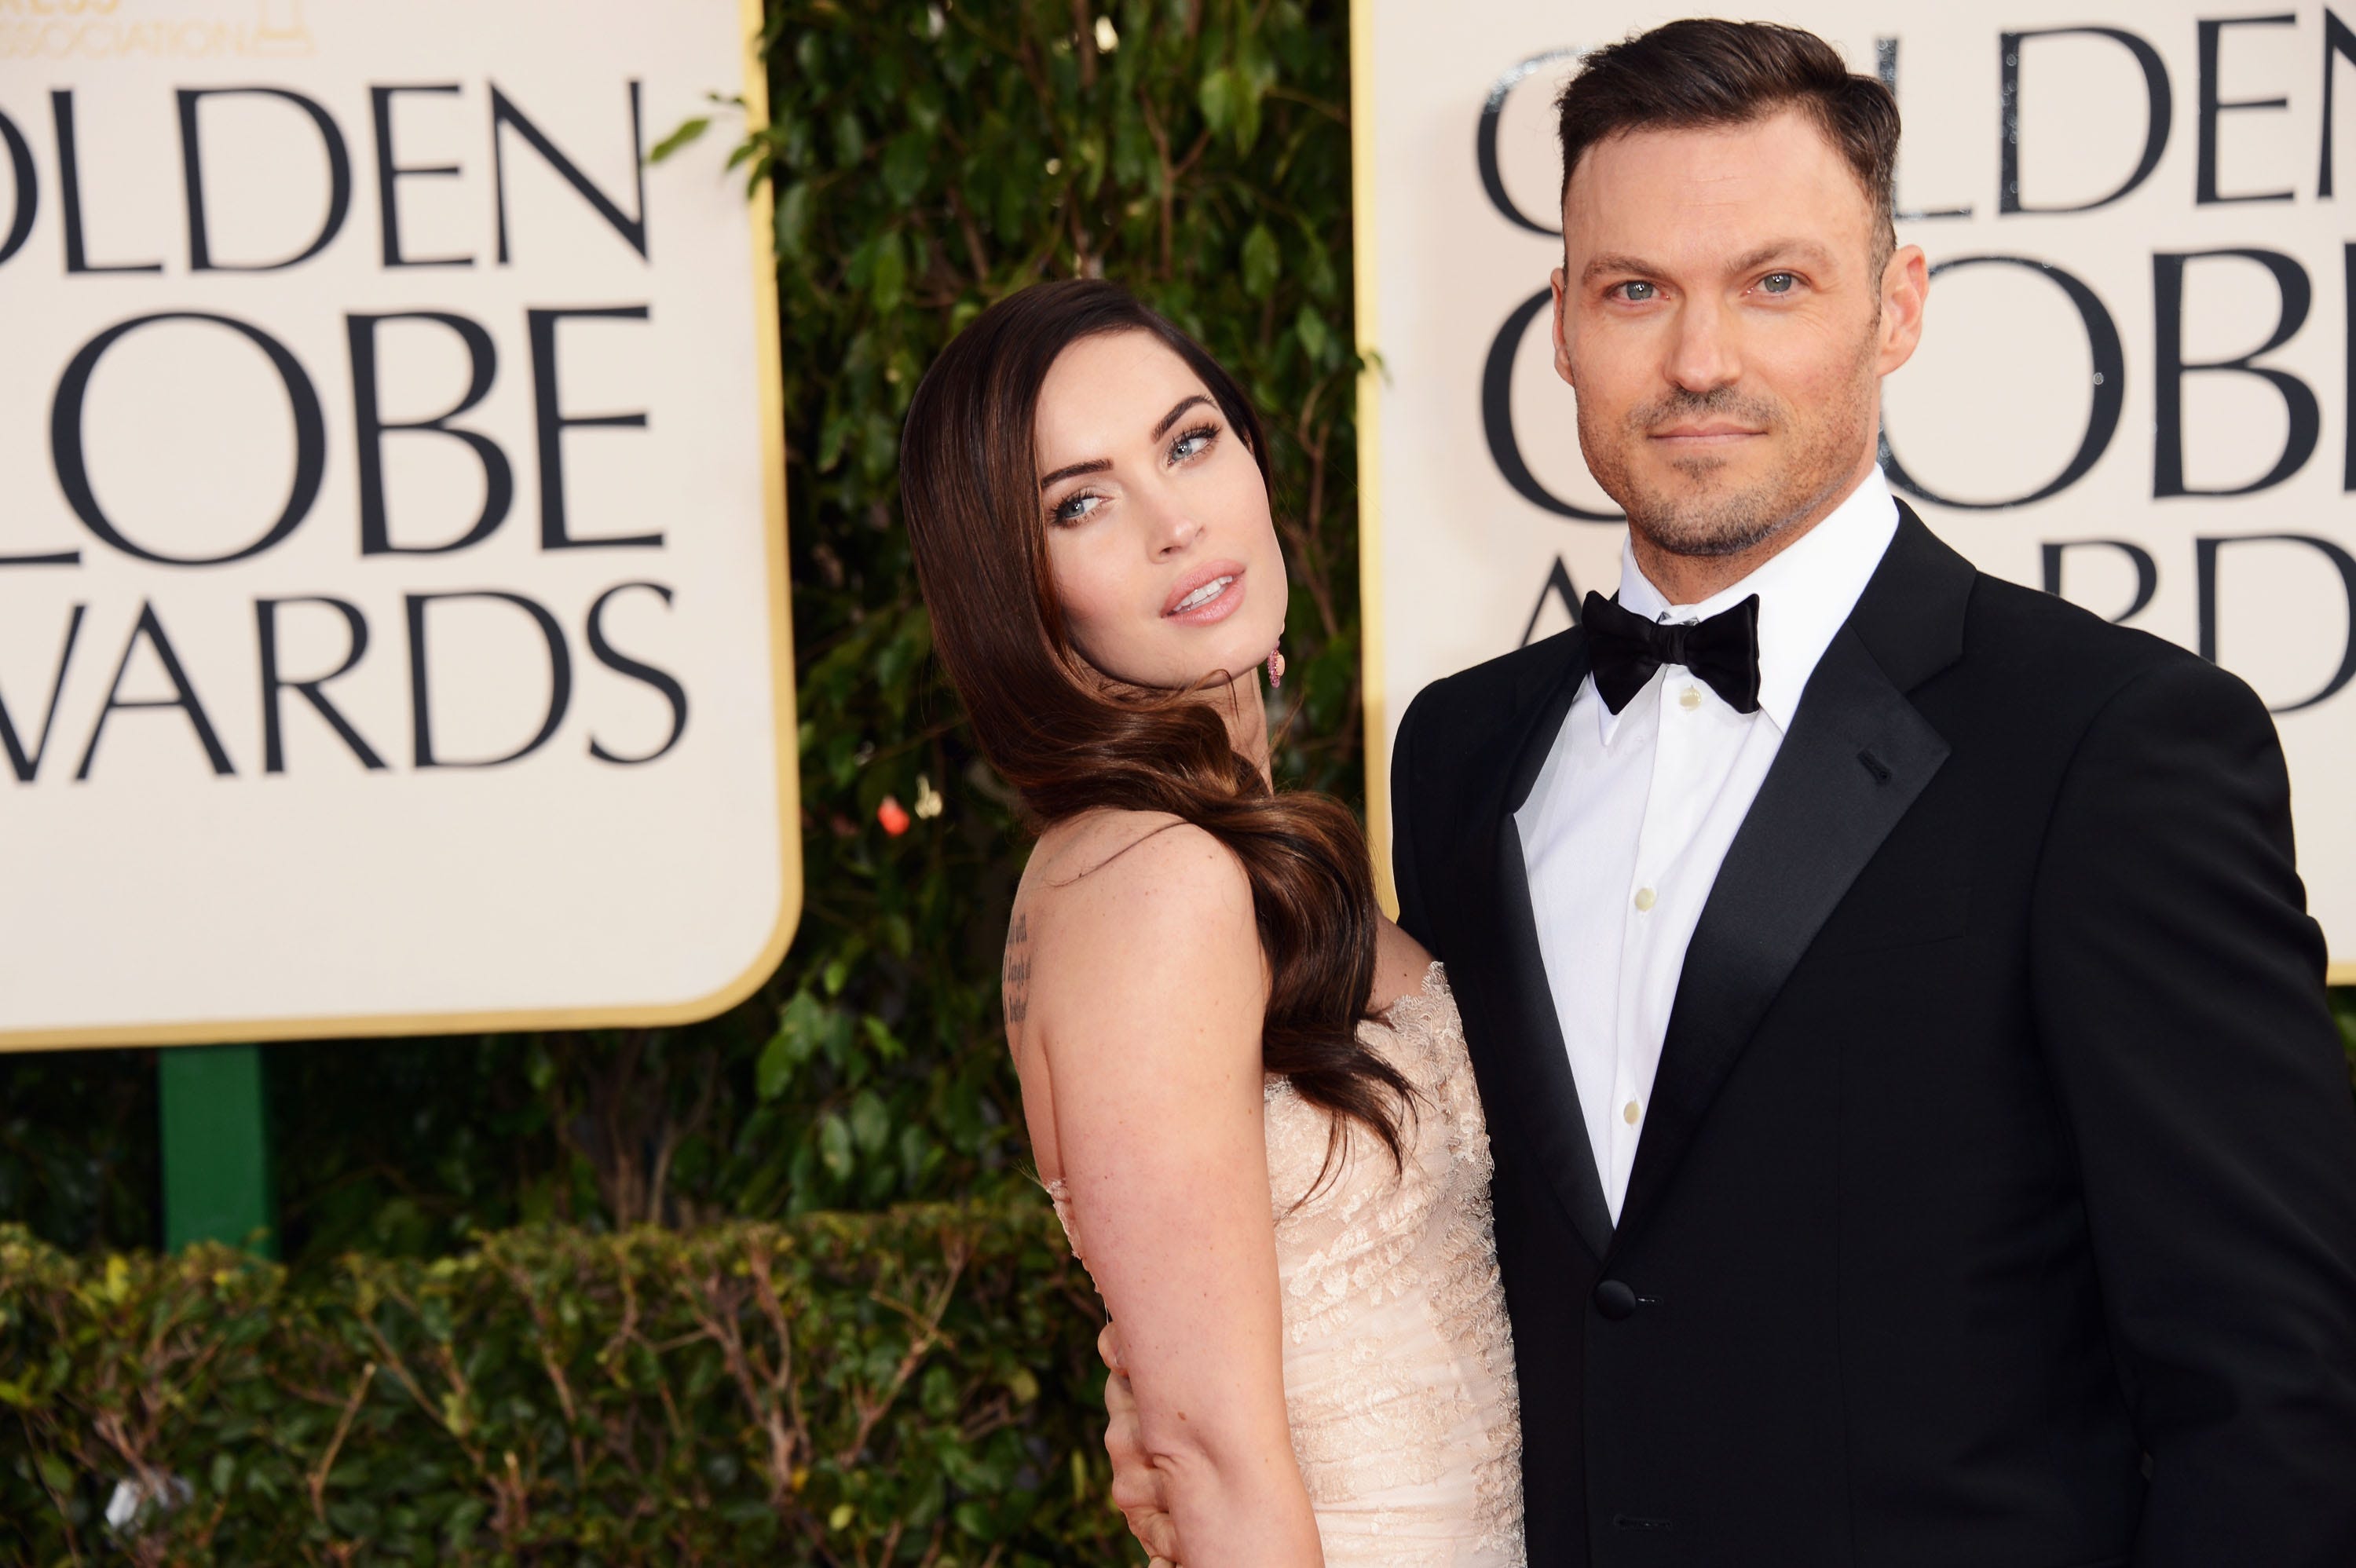 Megan Fox, Brian Austin Green split after nearly 10 years of marriage